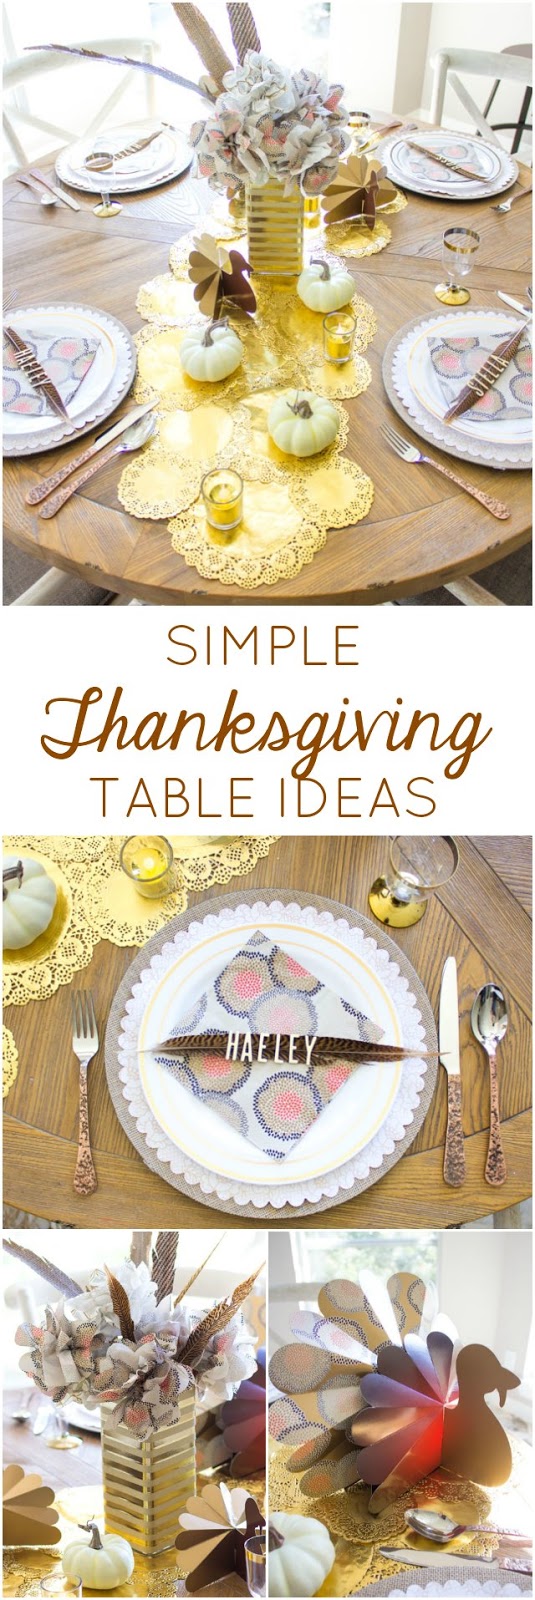 Check out these simple and elegant Thanksgiving table ideas!